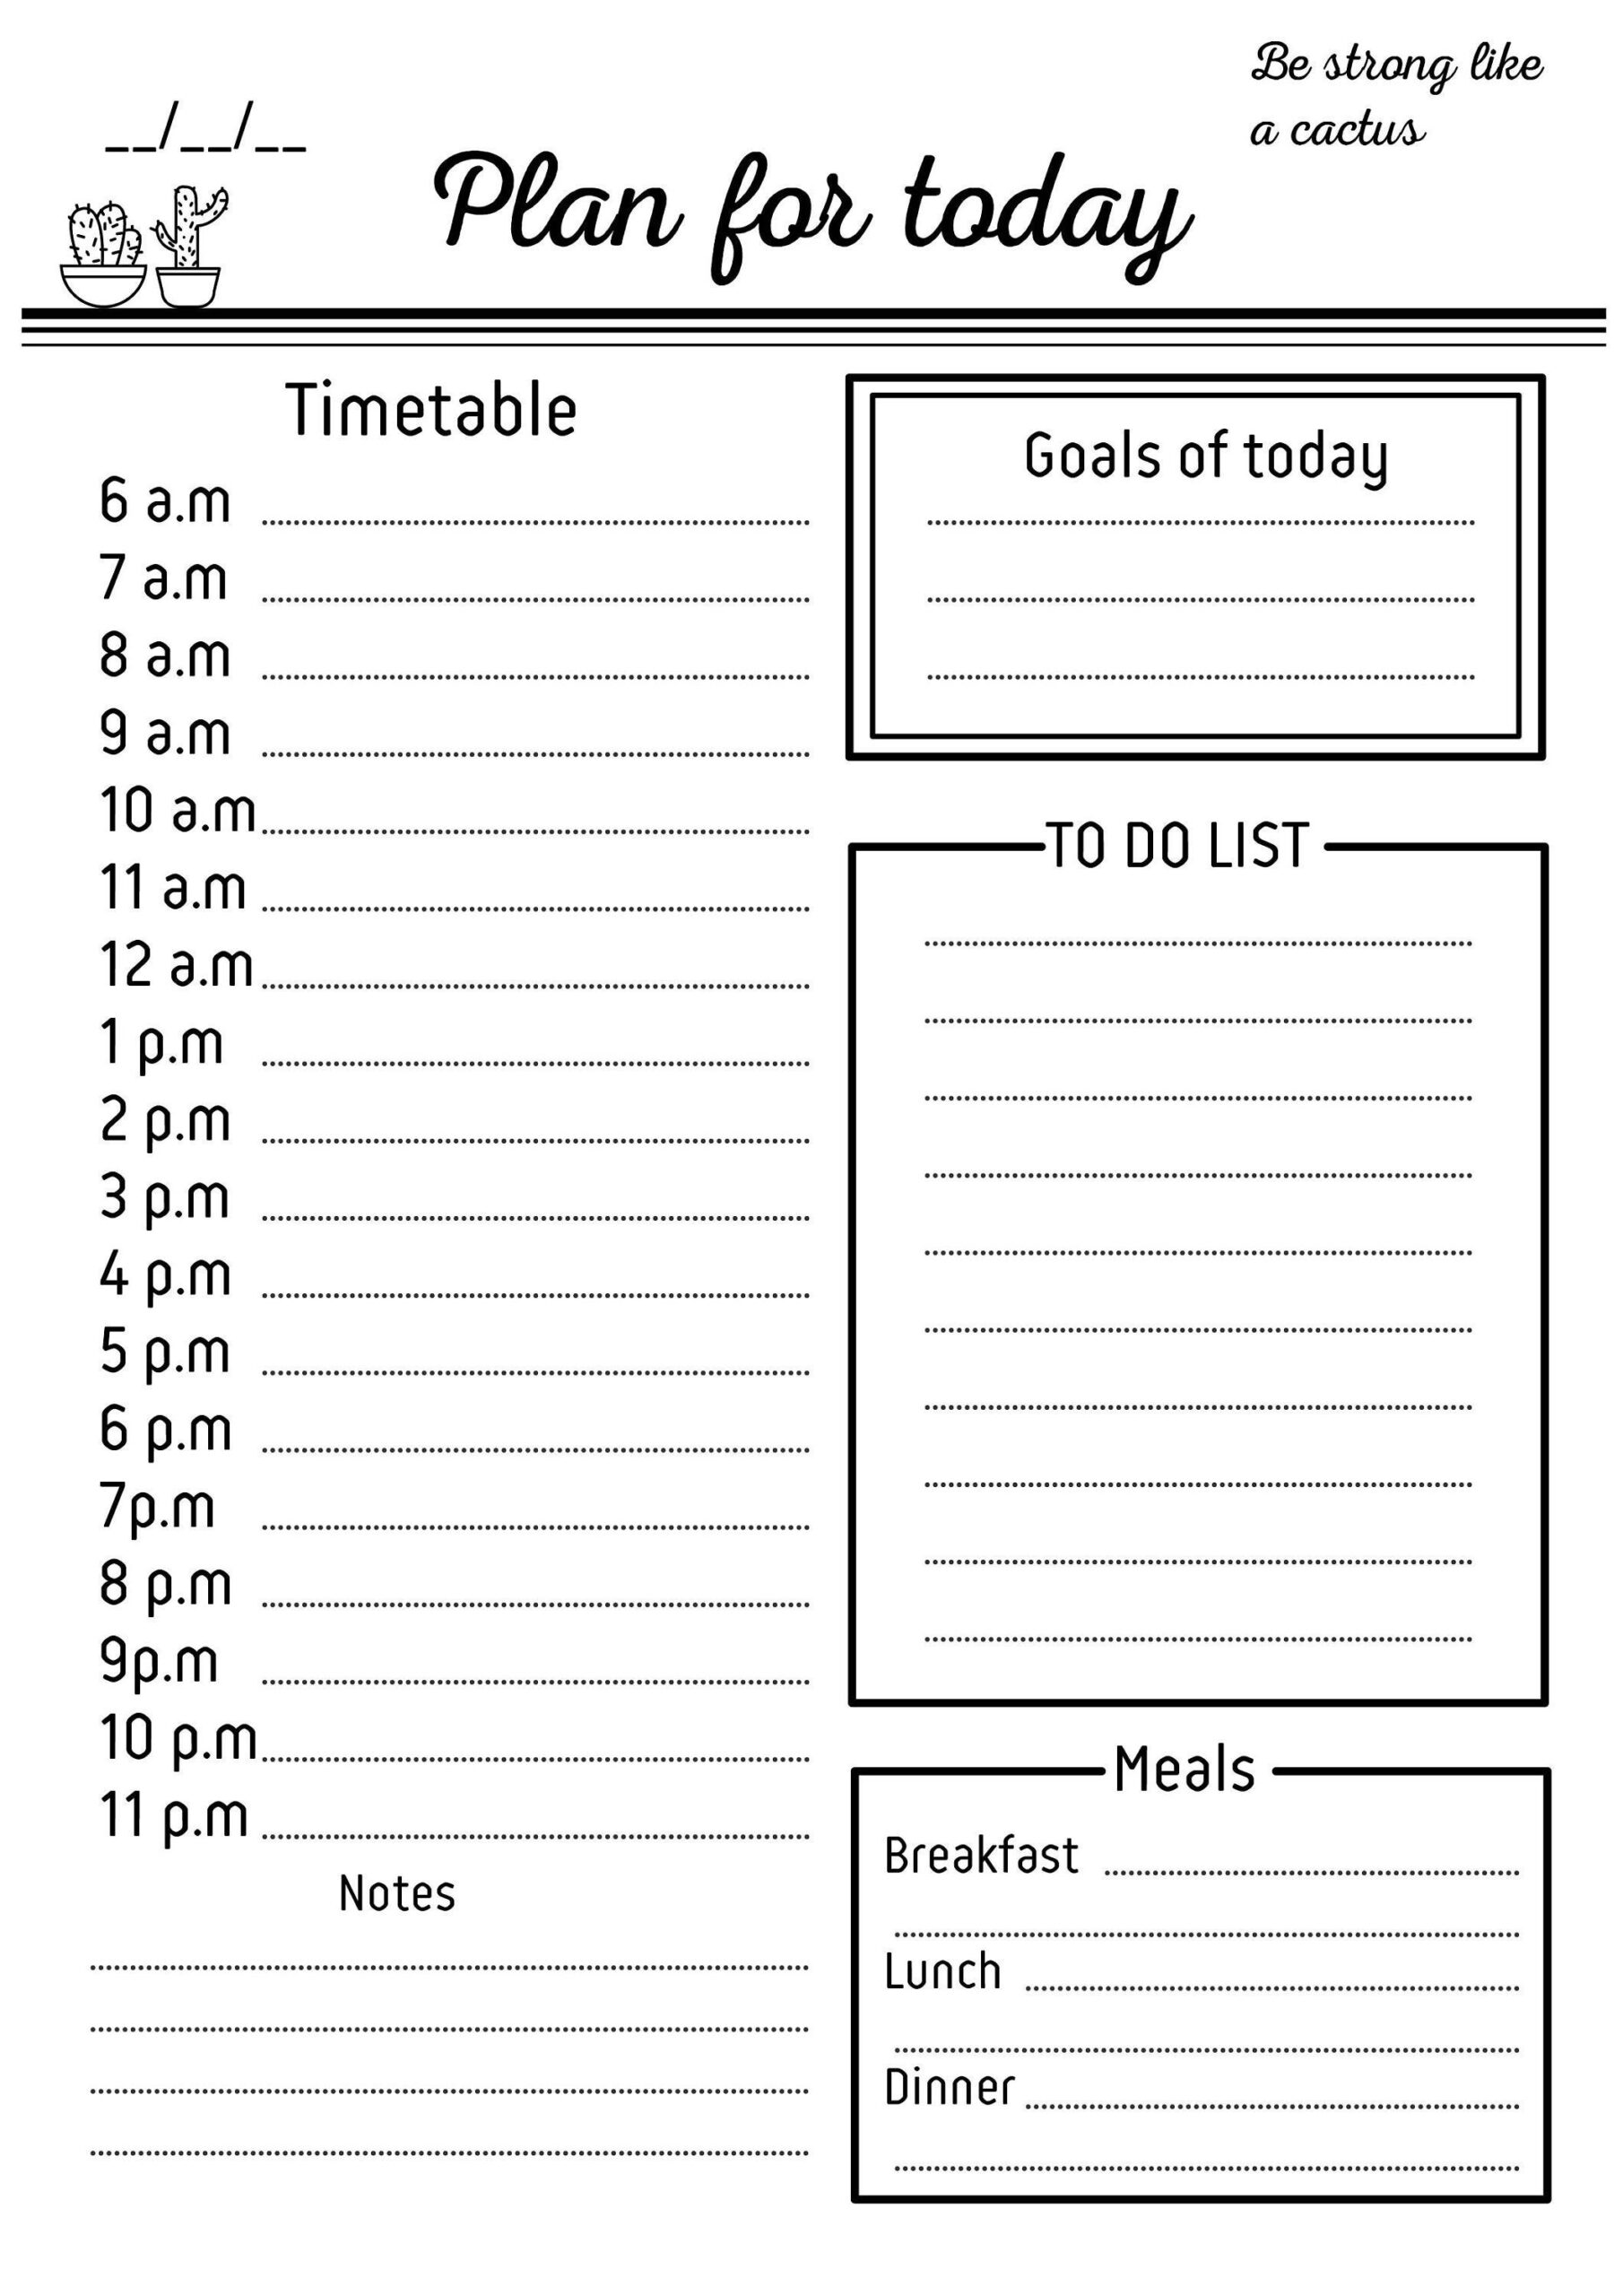 Daily Schedule Printable Daily Checklist Hourly Checklist Etsy 